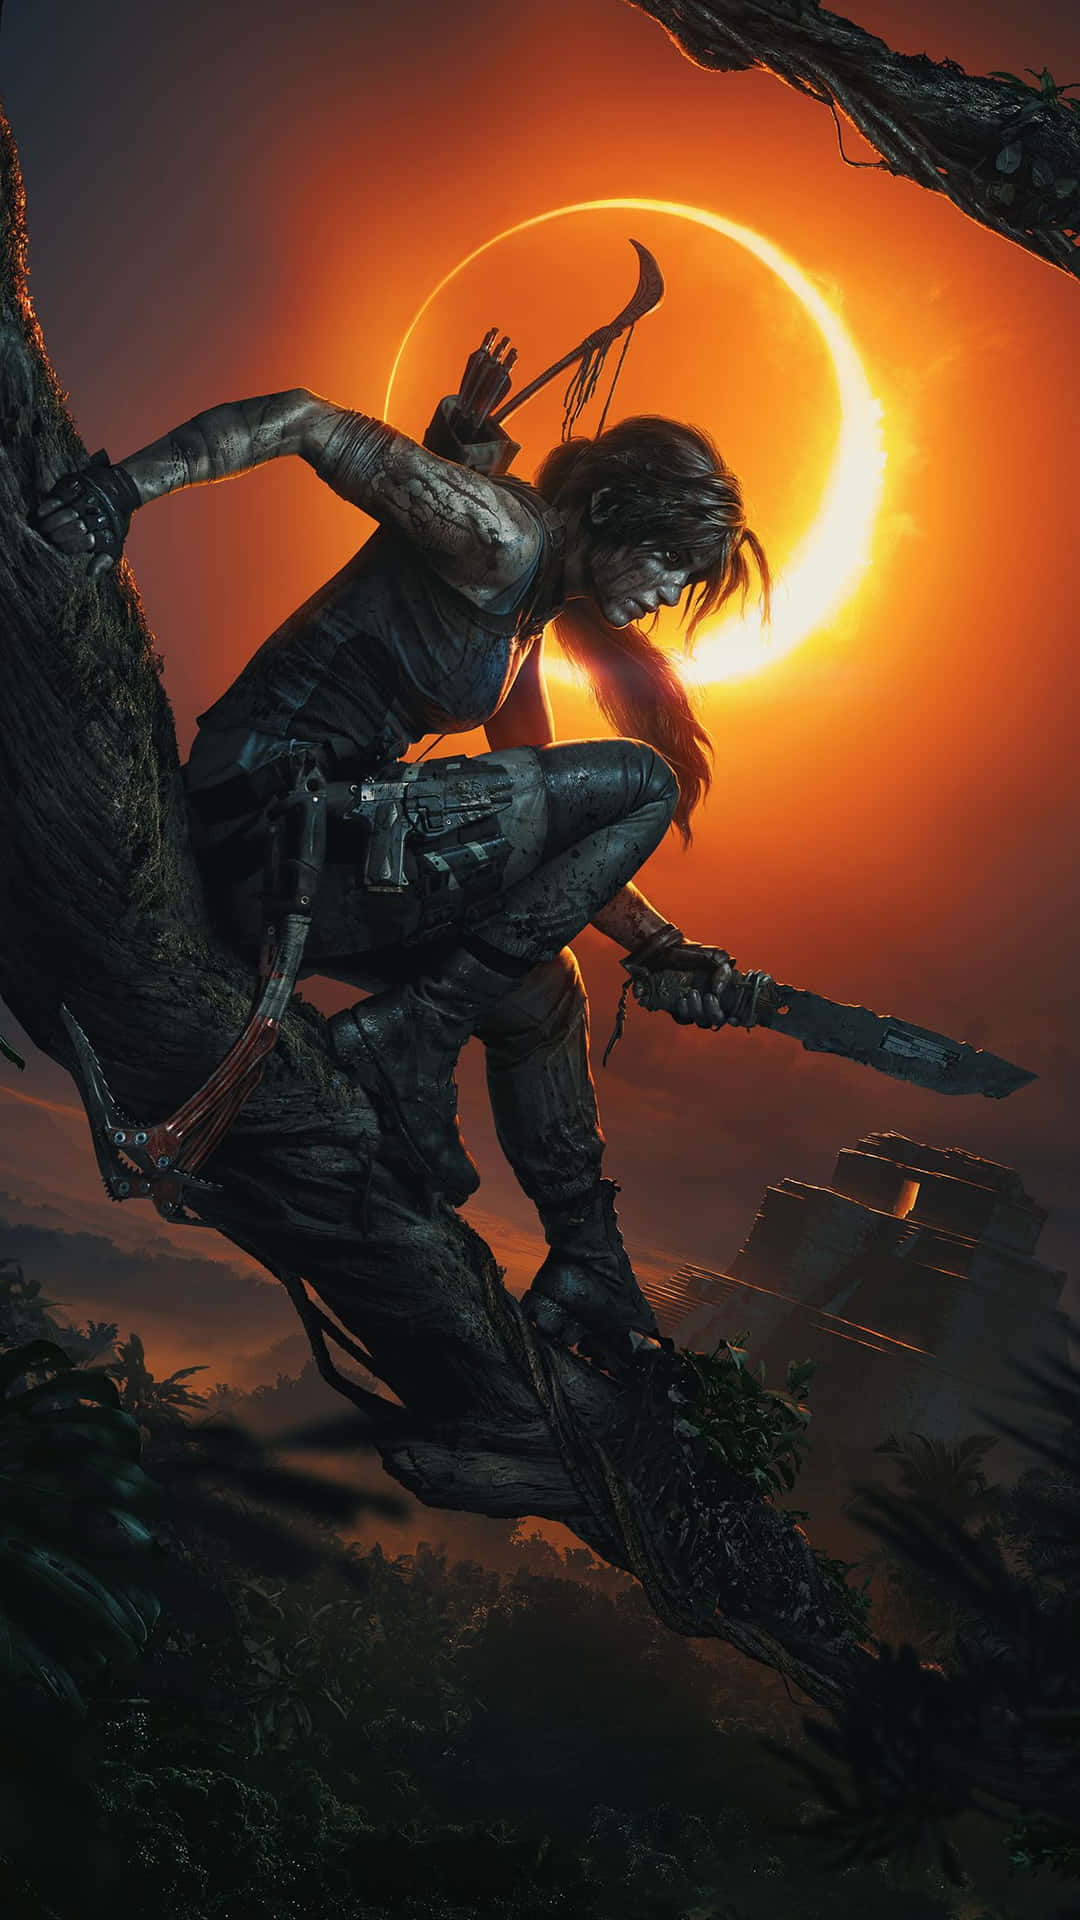 The Tomb Raider Is In The Sun With A Sword